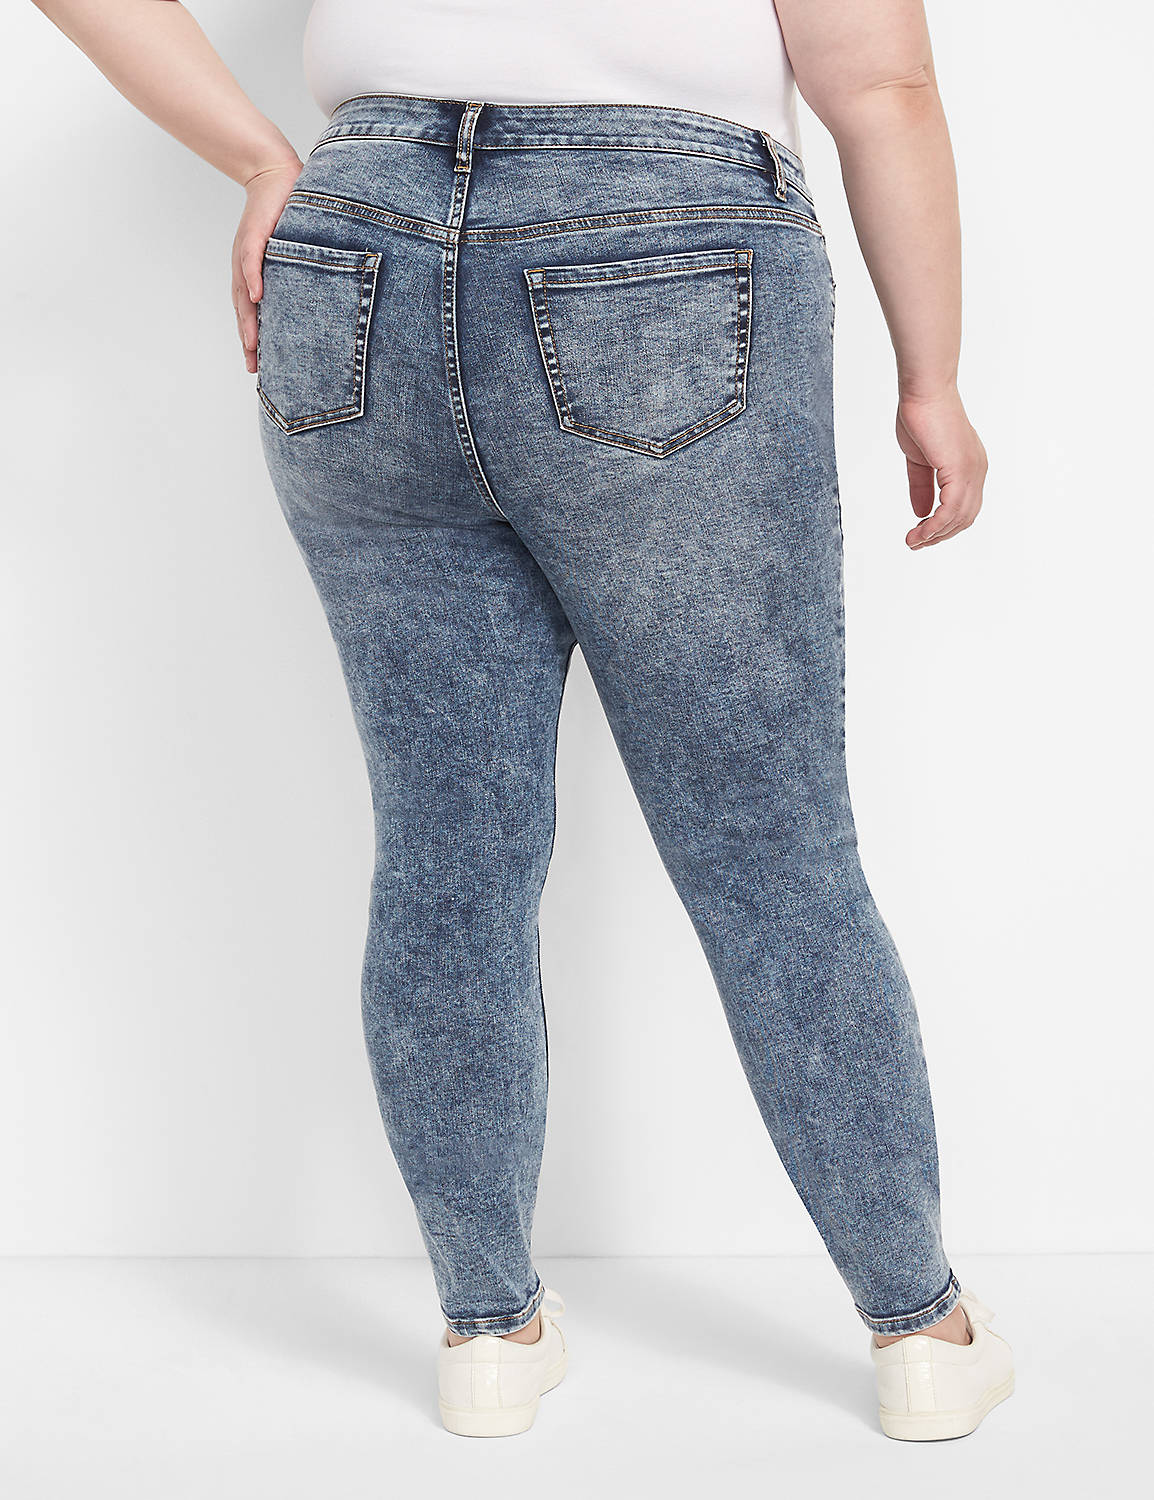 STRAIGHT FIT HIGH RISE SKINNY - SUZ Product Image 2